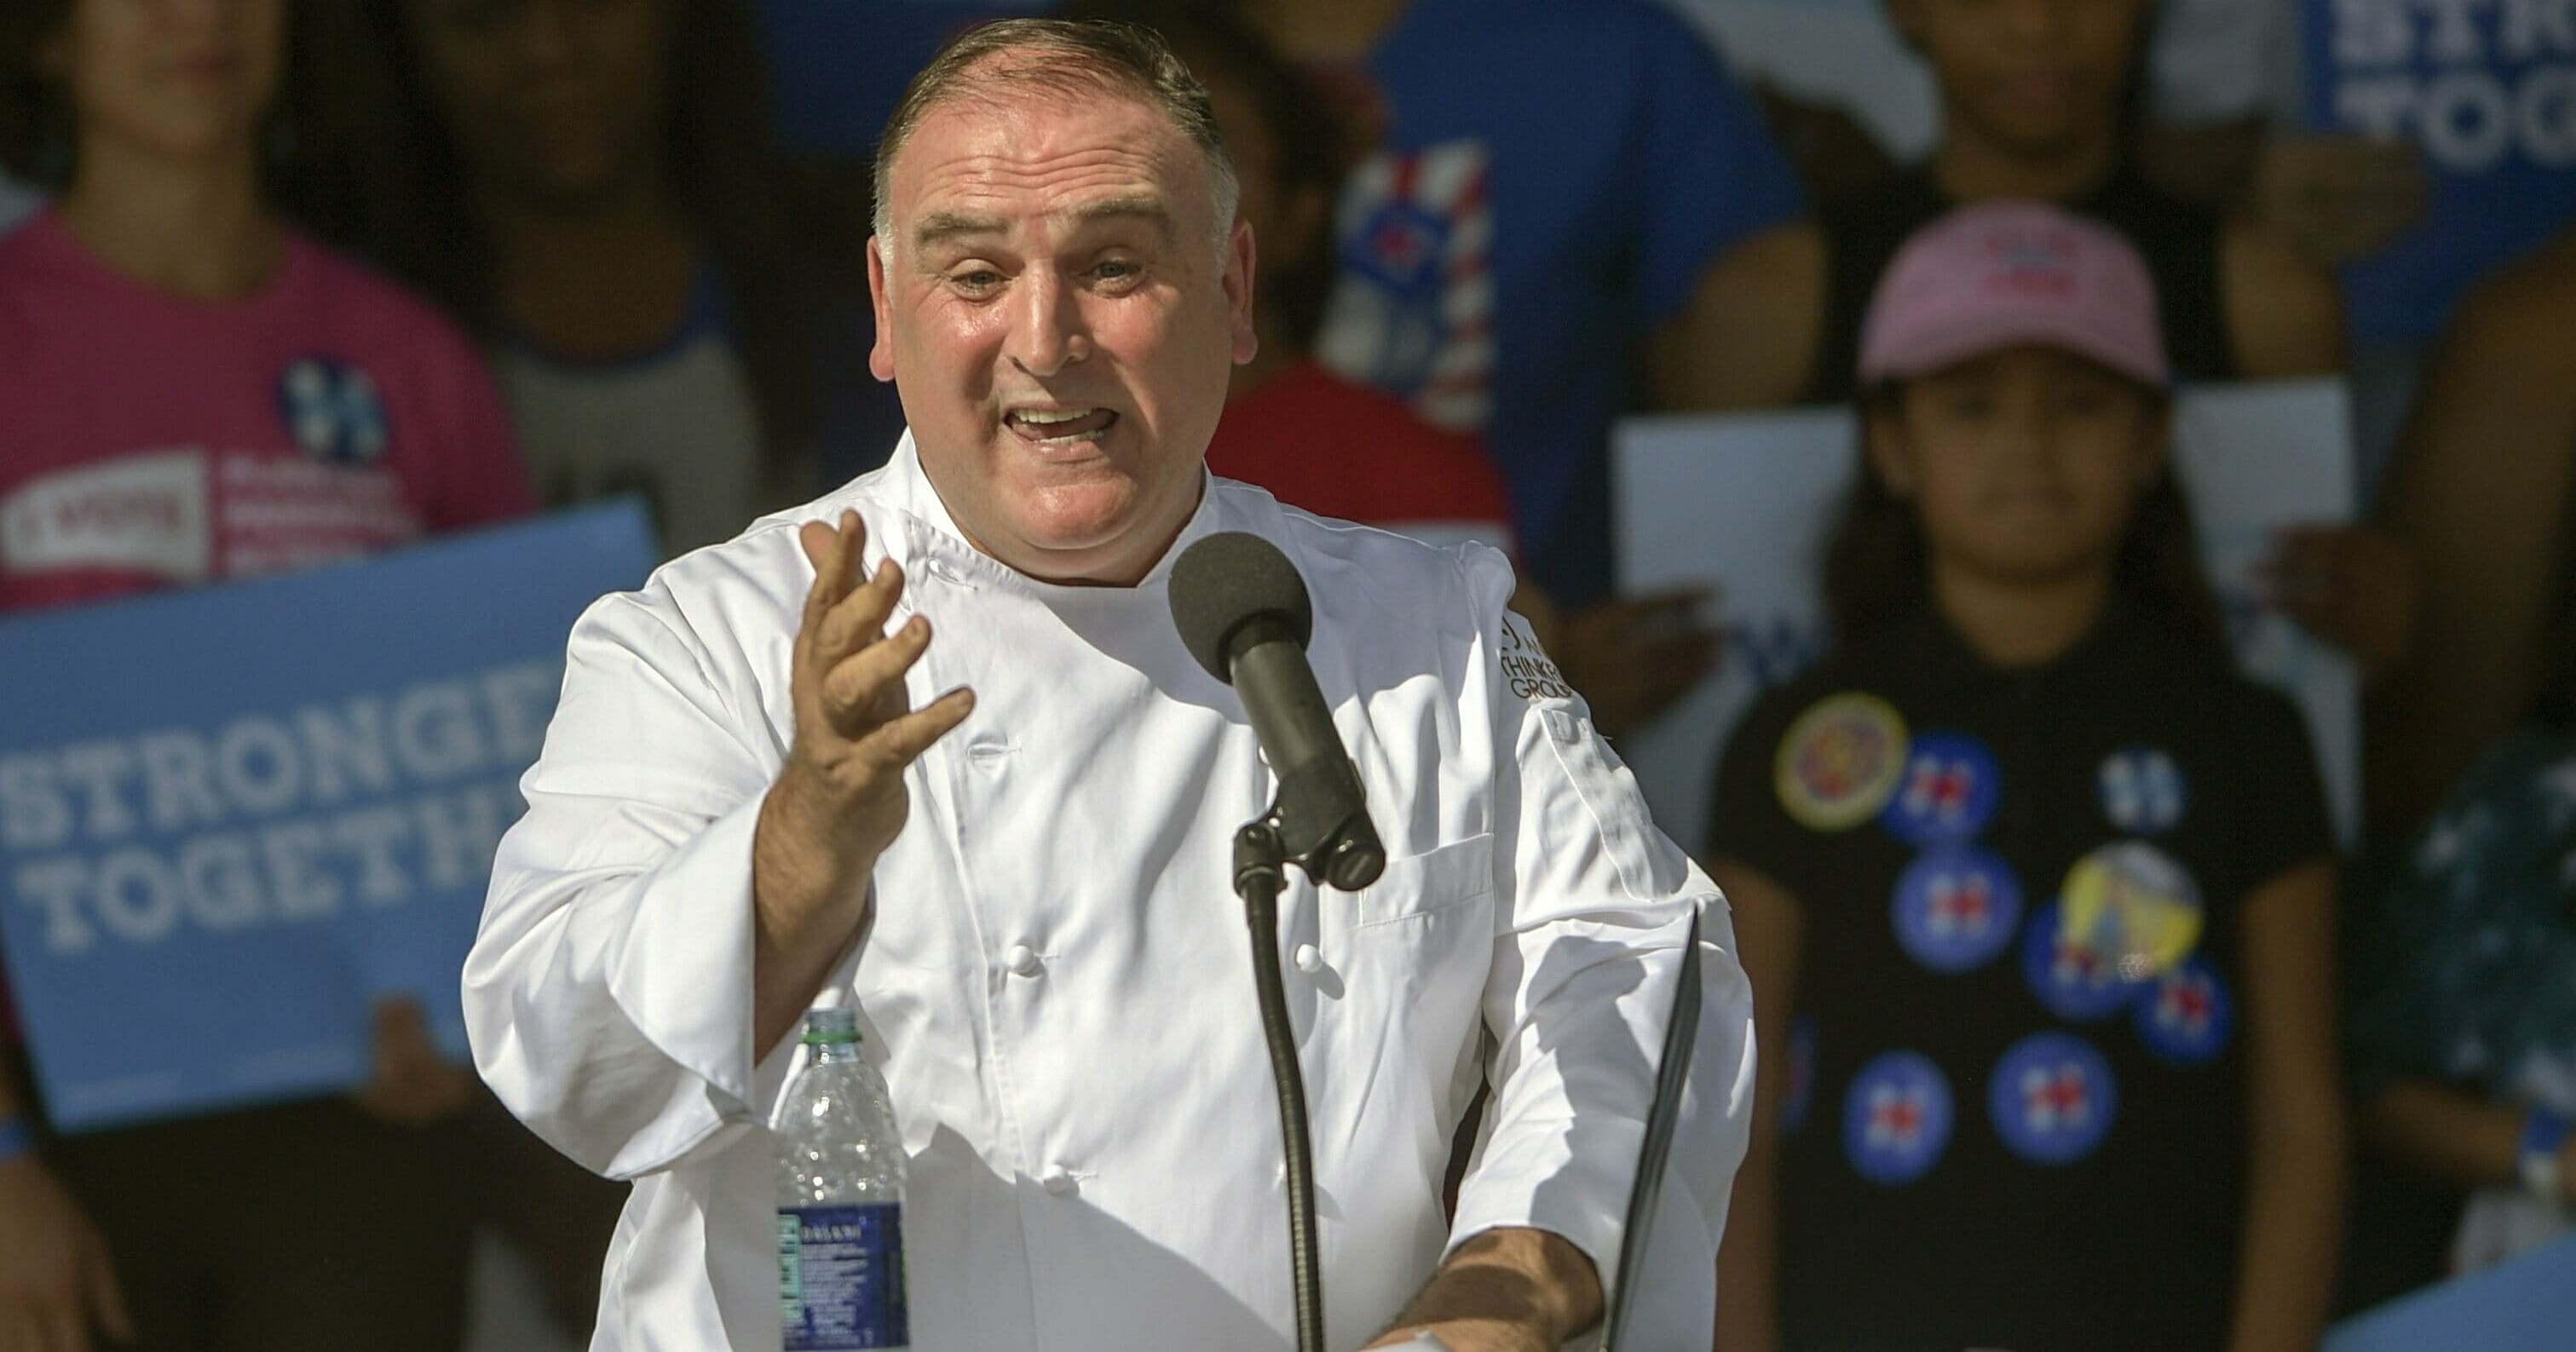 In this Oct. 26, 2016, file photo, Spanish-American chef José Andrés speaks in Tampa, Florida.